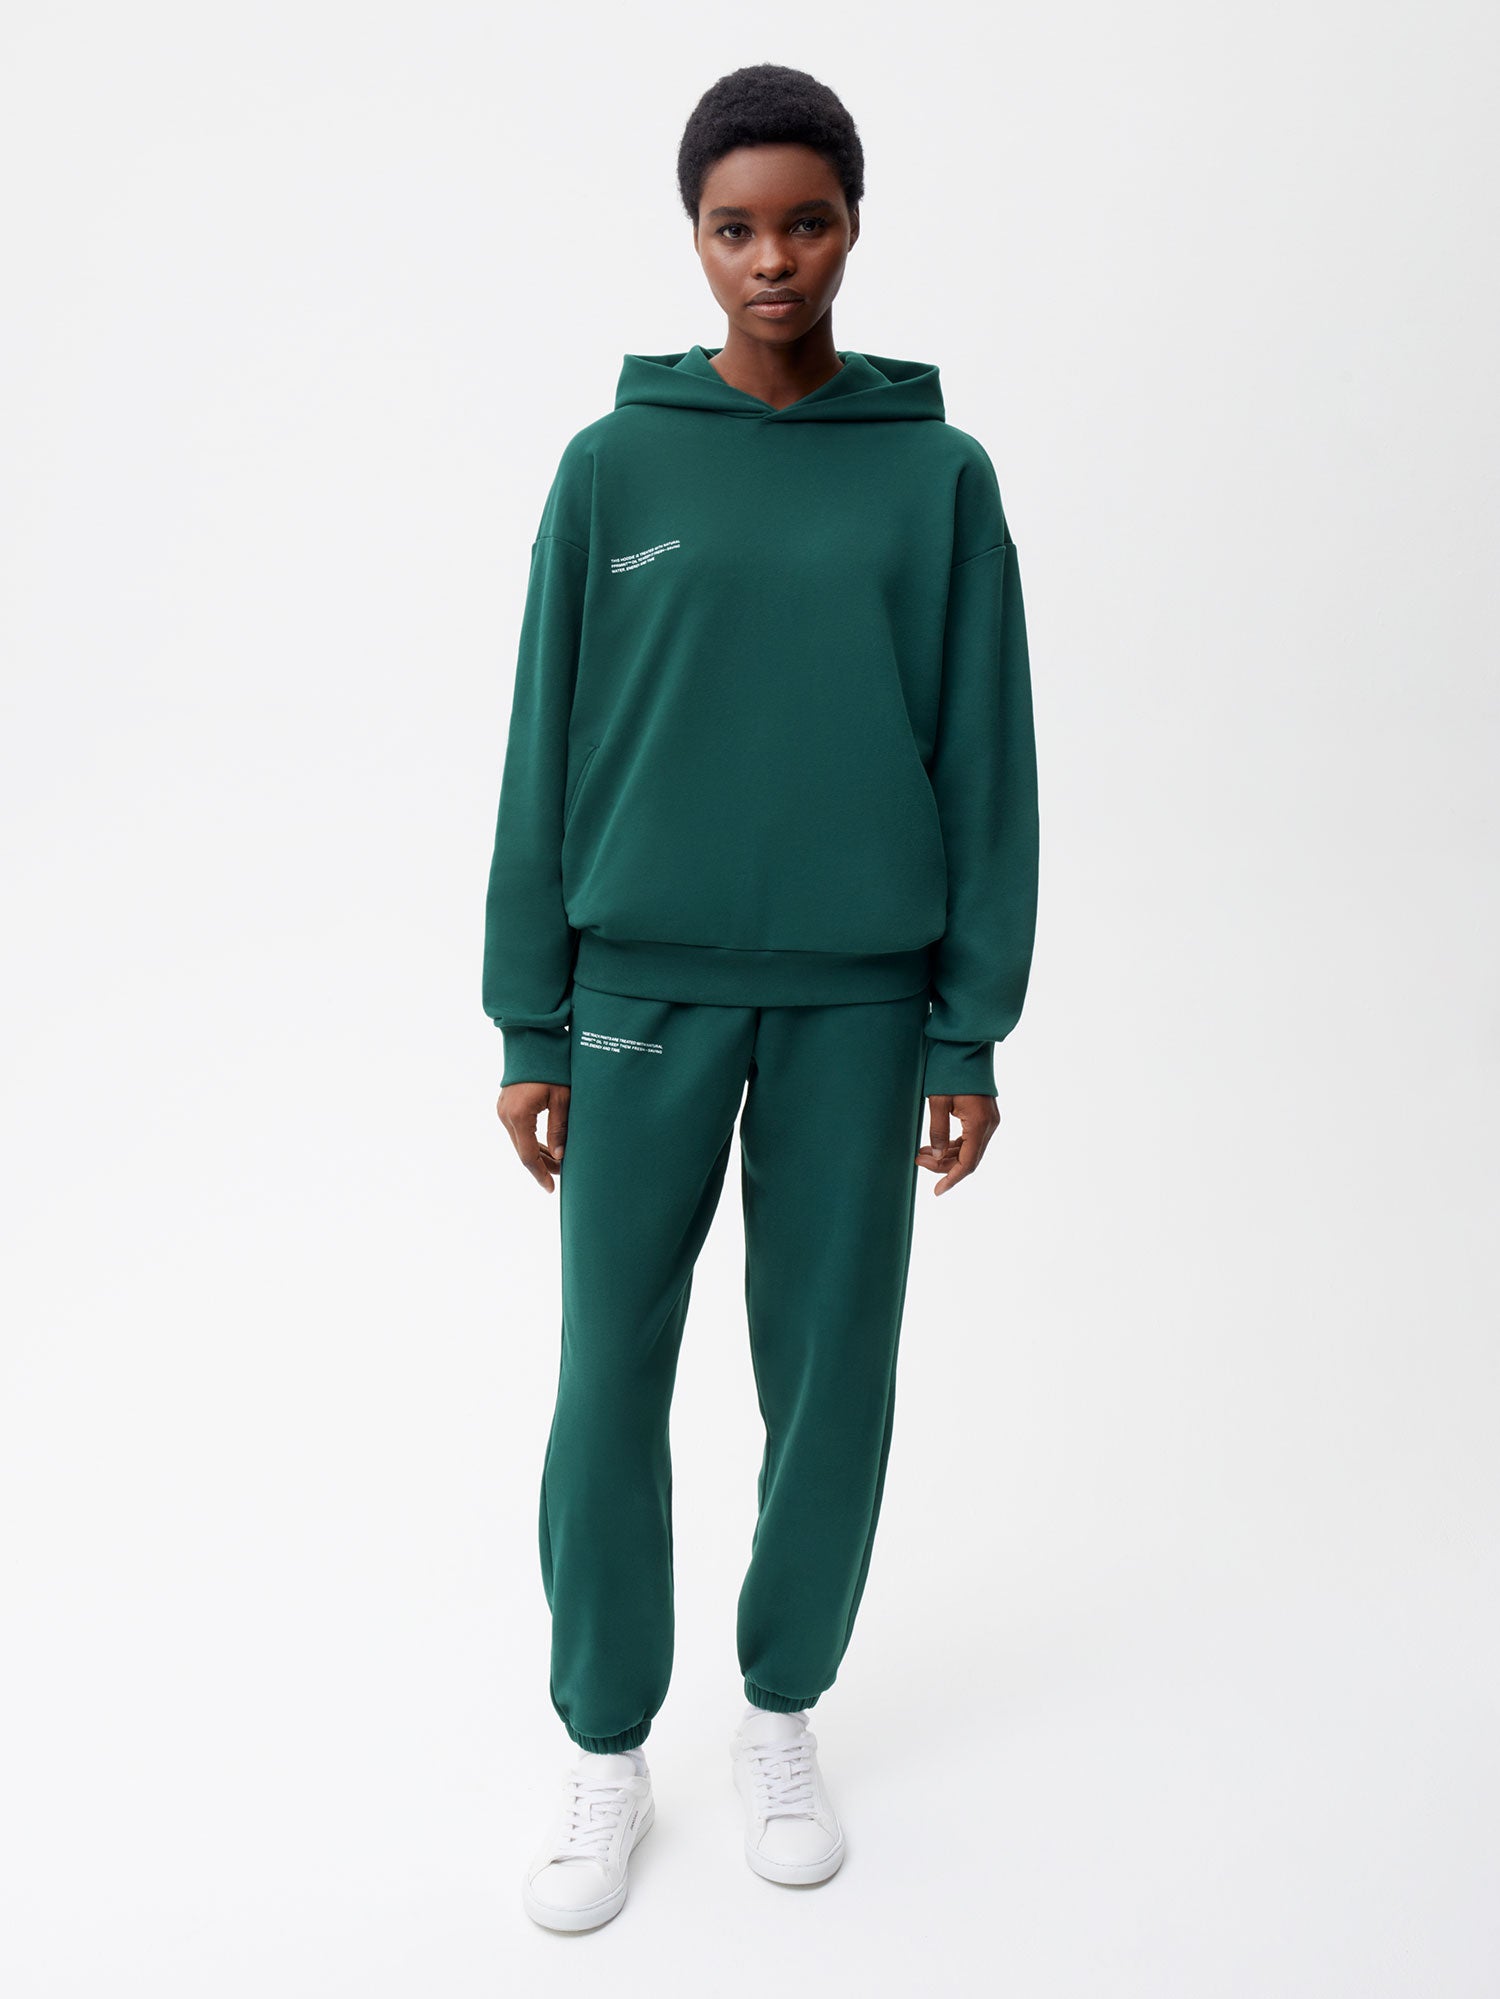 Buy Green Track Pants for Women by KICA Online